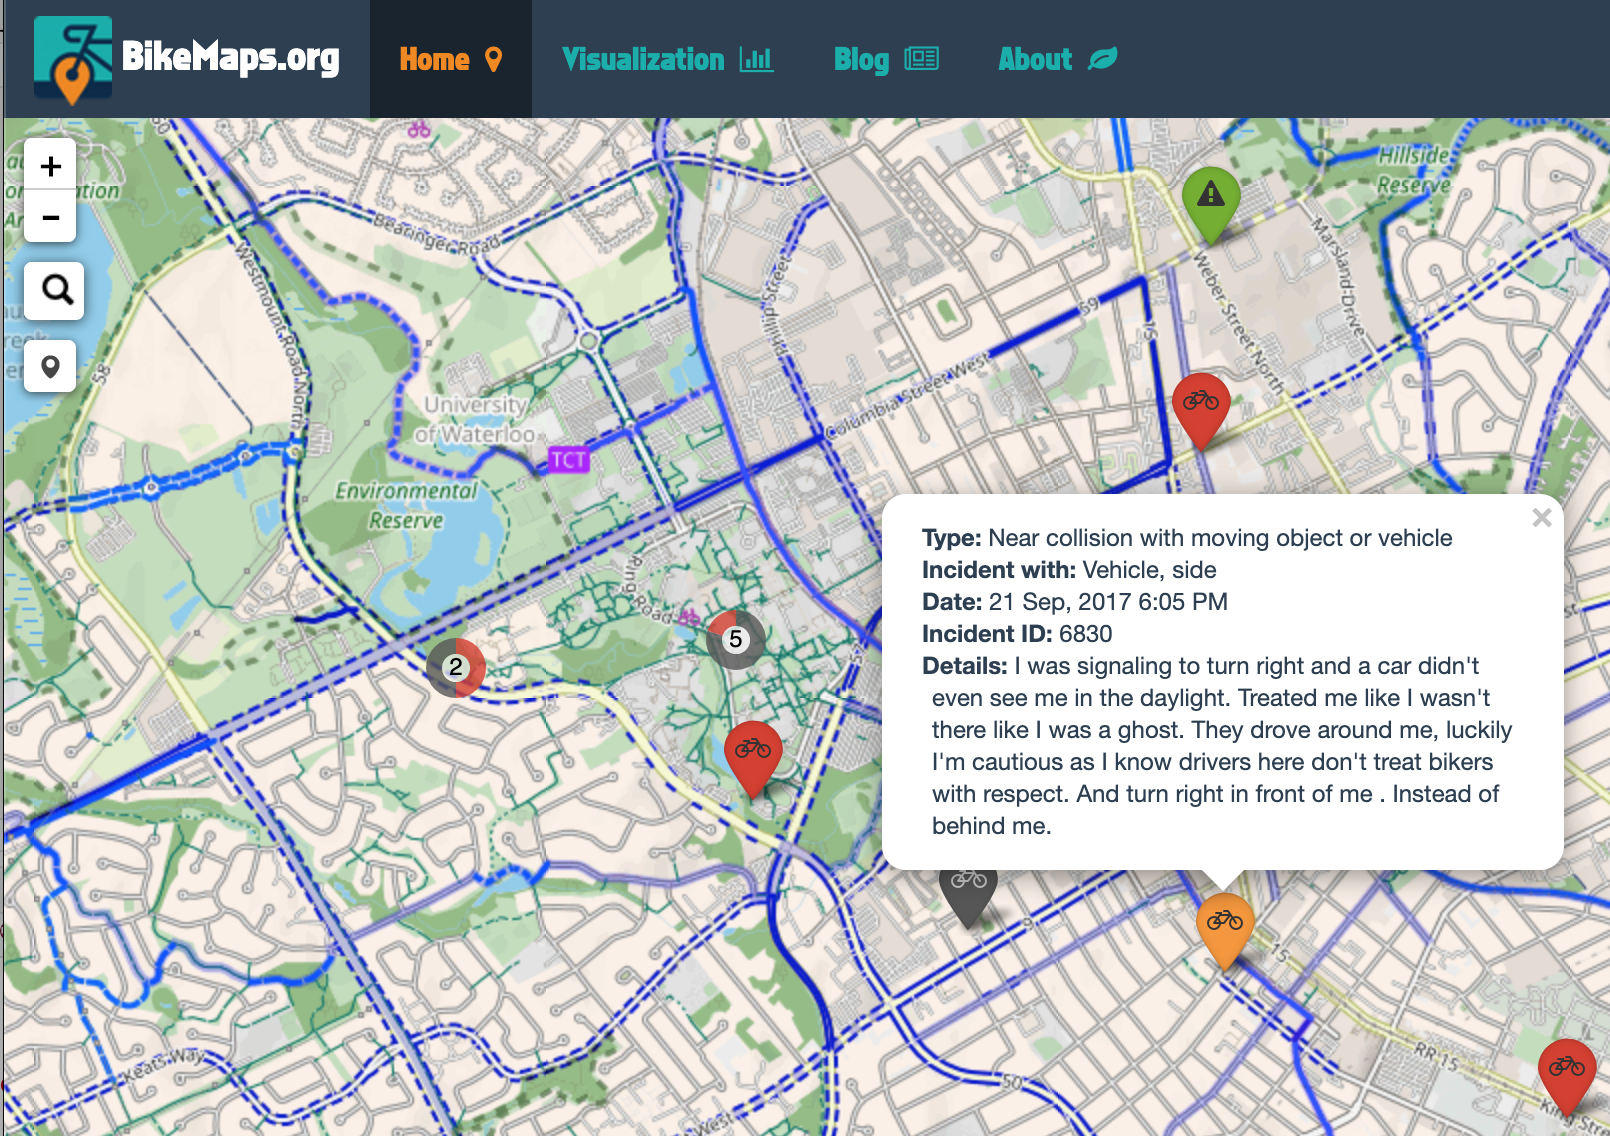 Citizen science project Bike Maps uses web-mapping and geospatial data to track bicycle collisions, near misses, and thefts in cities across the world. Here the orange pin has been clicked to explore more attribute information about the near-miss event.